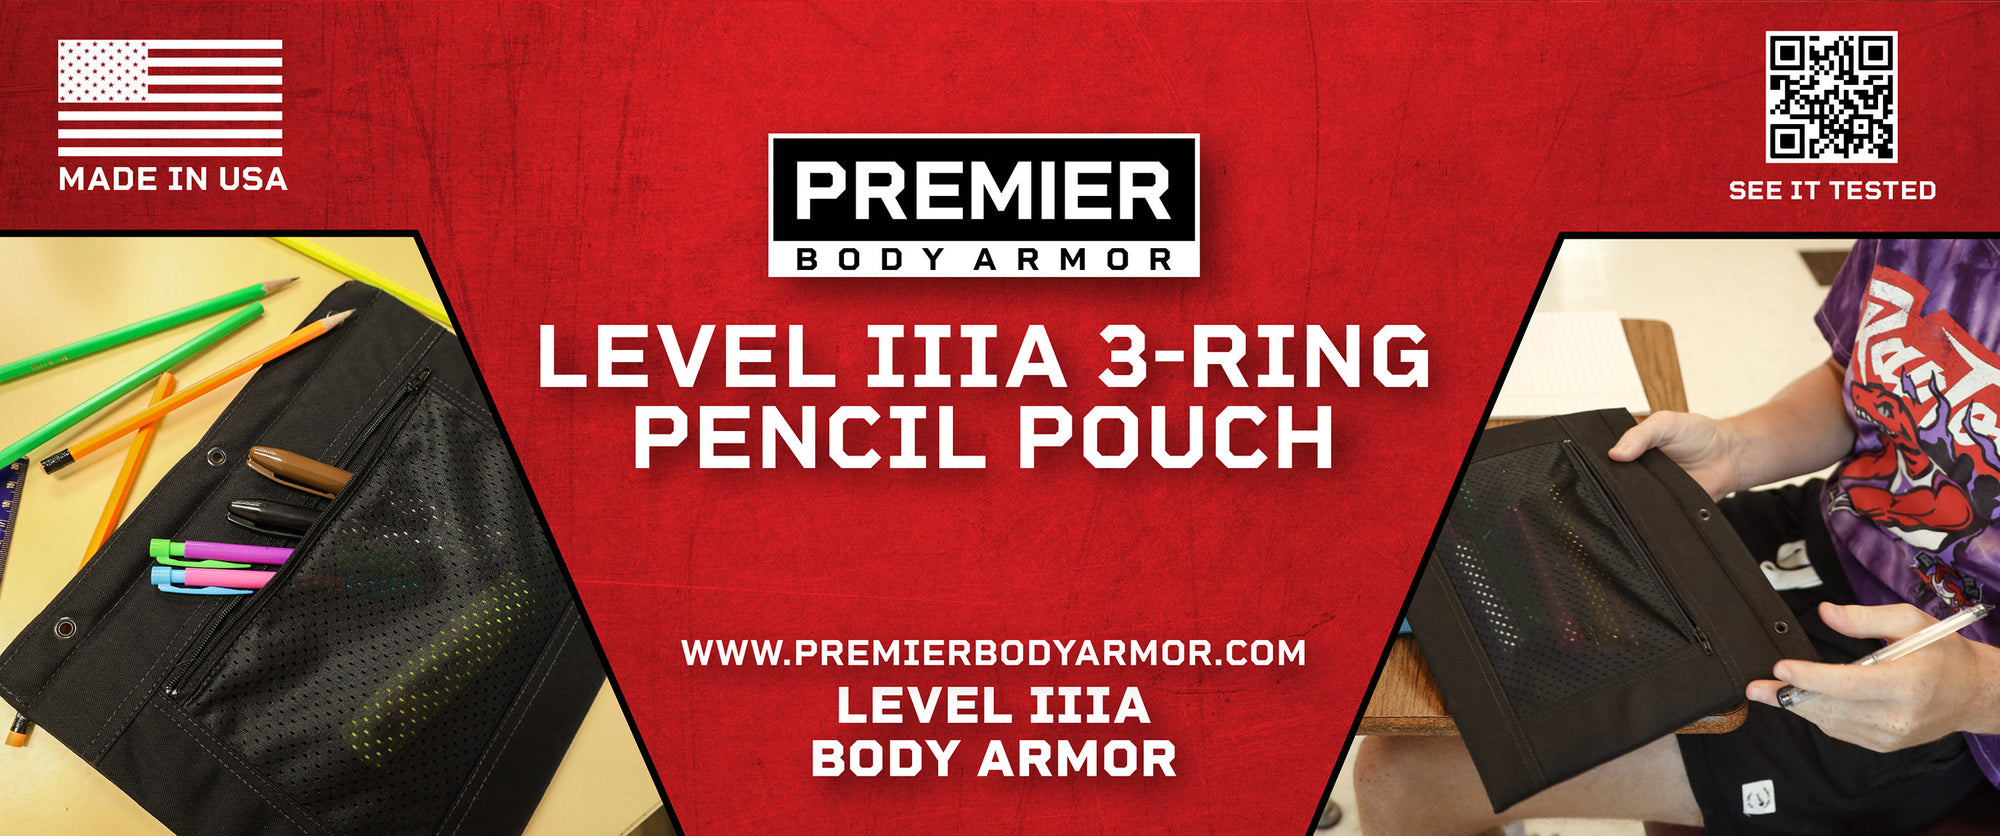 bulletproof level 3a pencil pouch is great for both school supplies and school safety